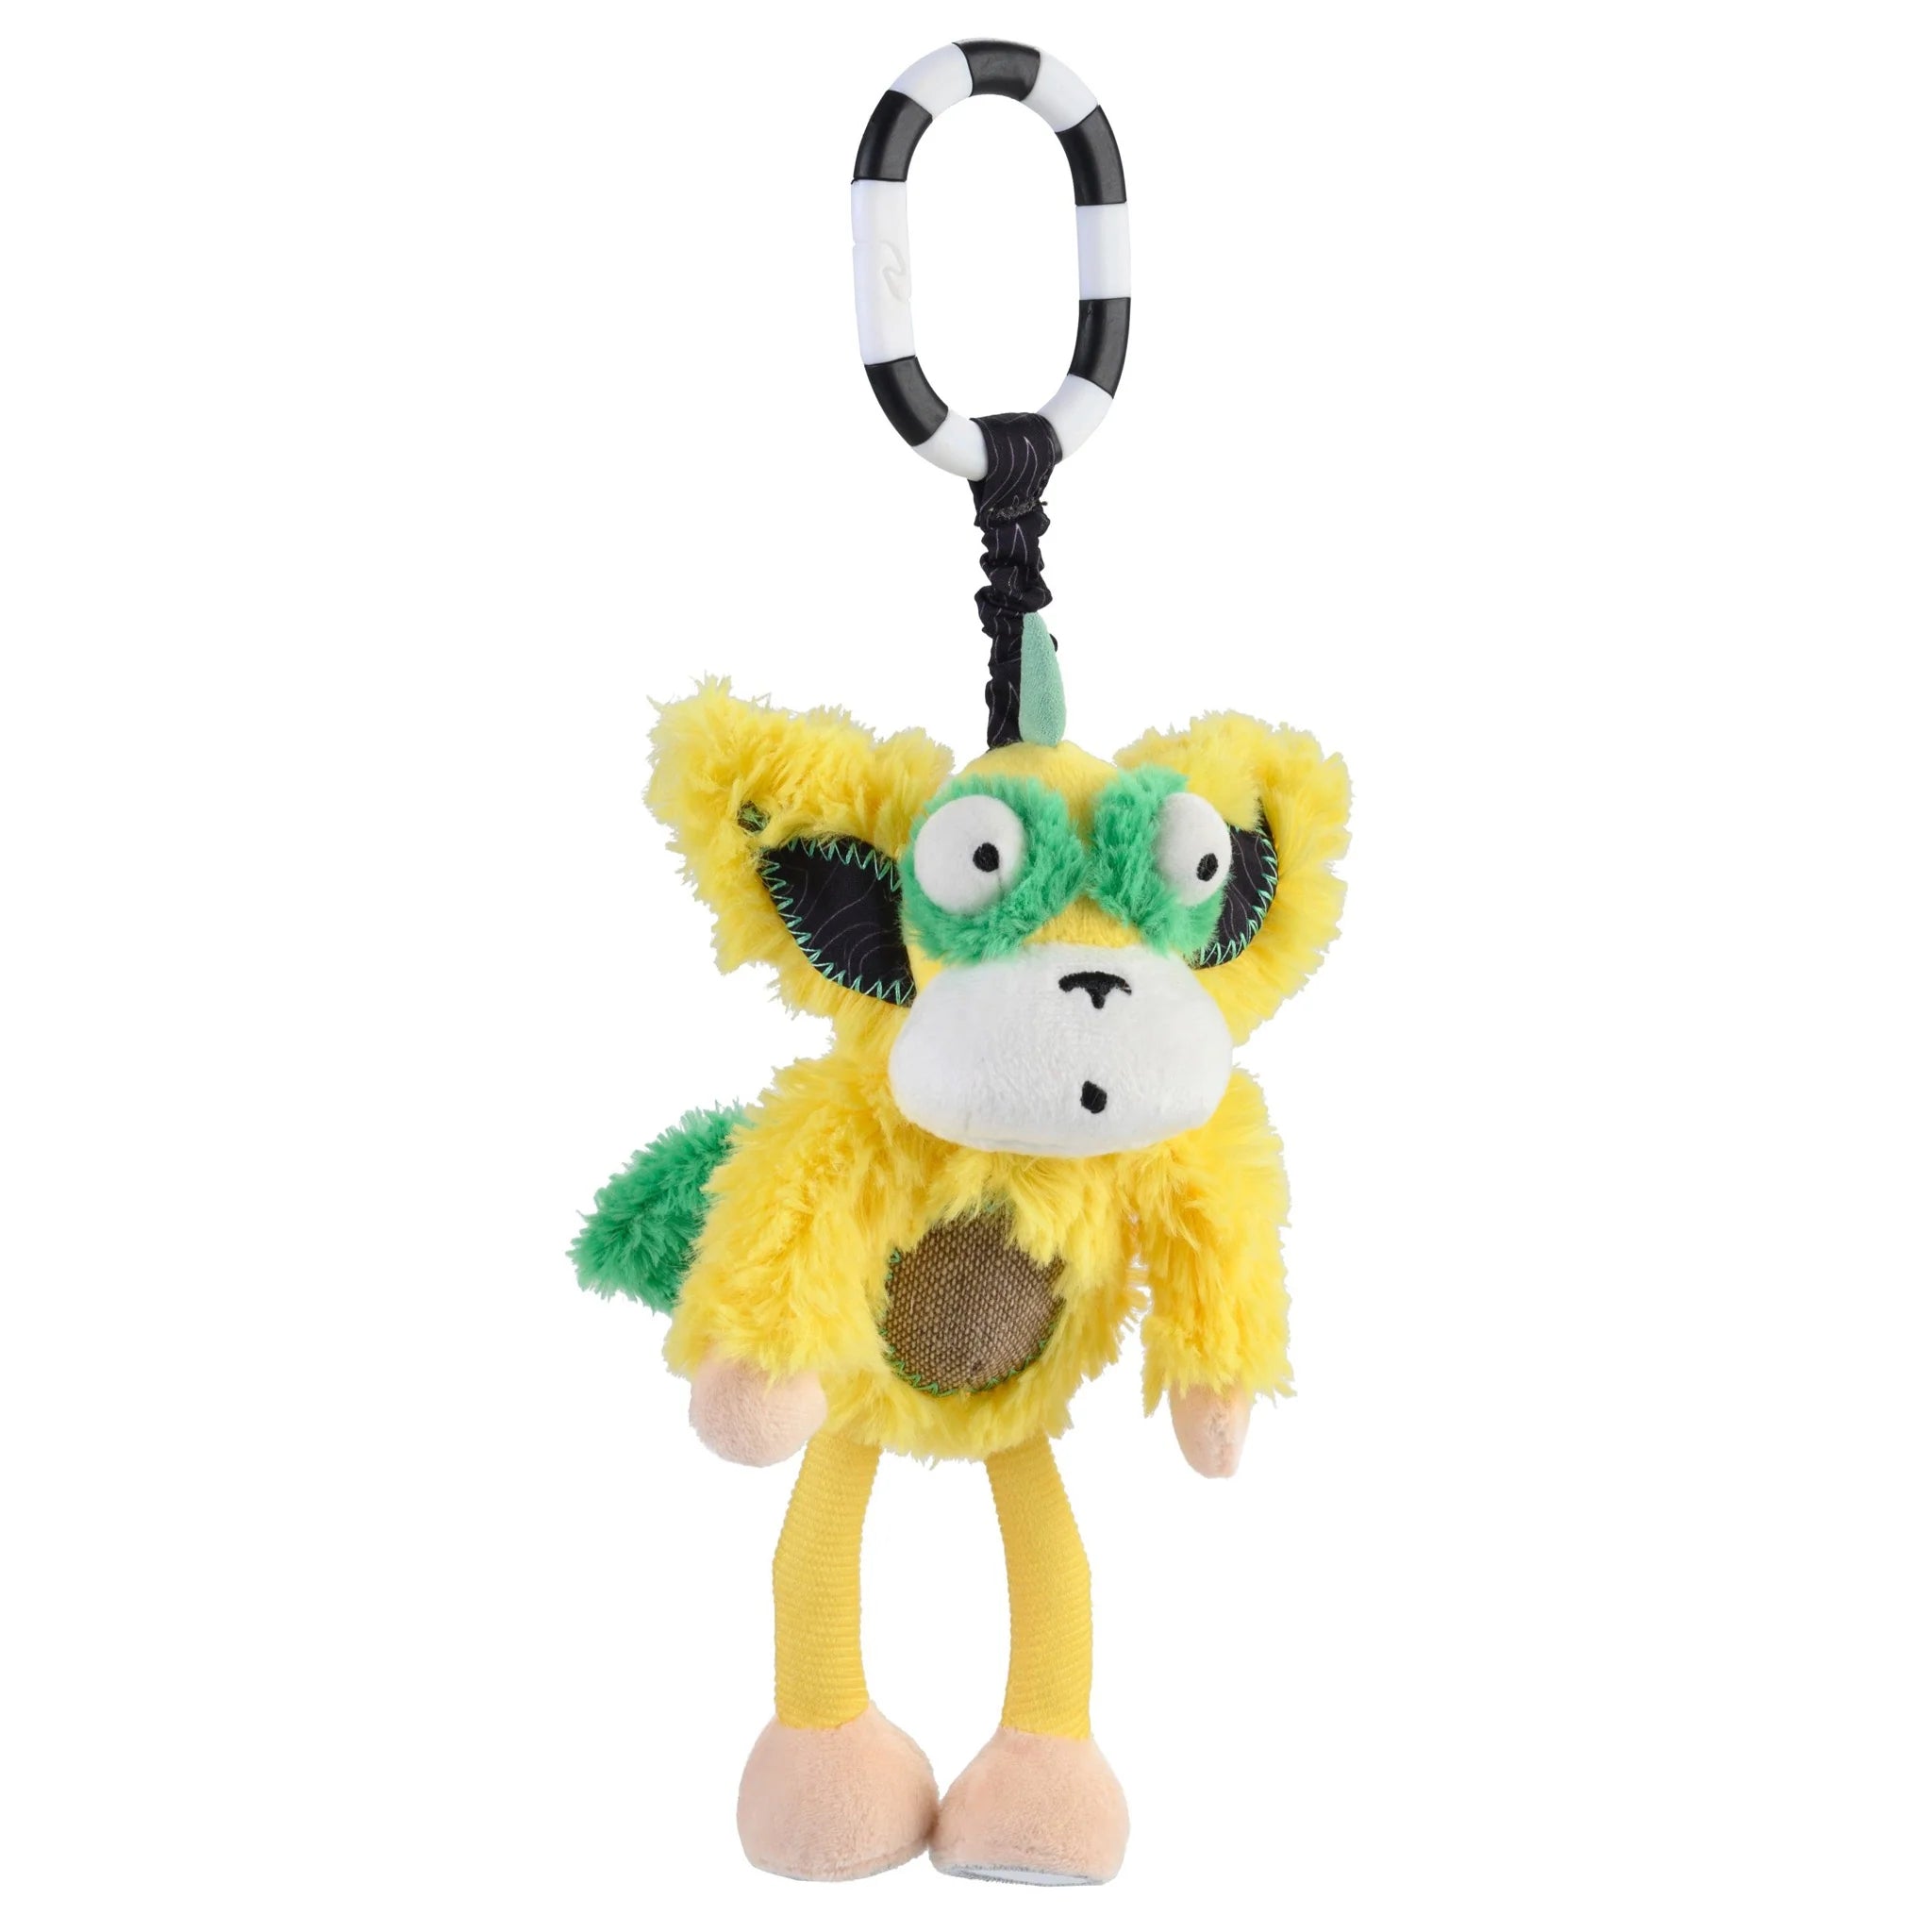 Marley the Horn Headed Monkey Chime & See Hanging Activity Toy - Twinkle Twinkle Little One